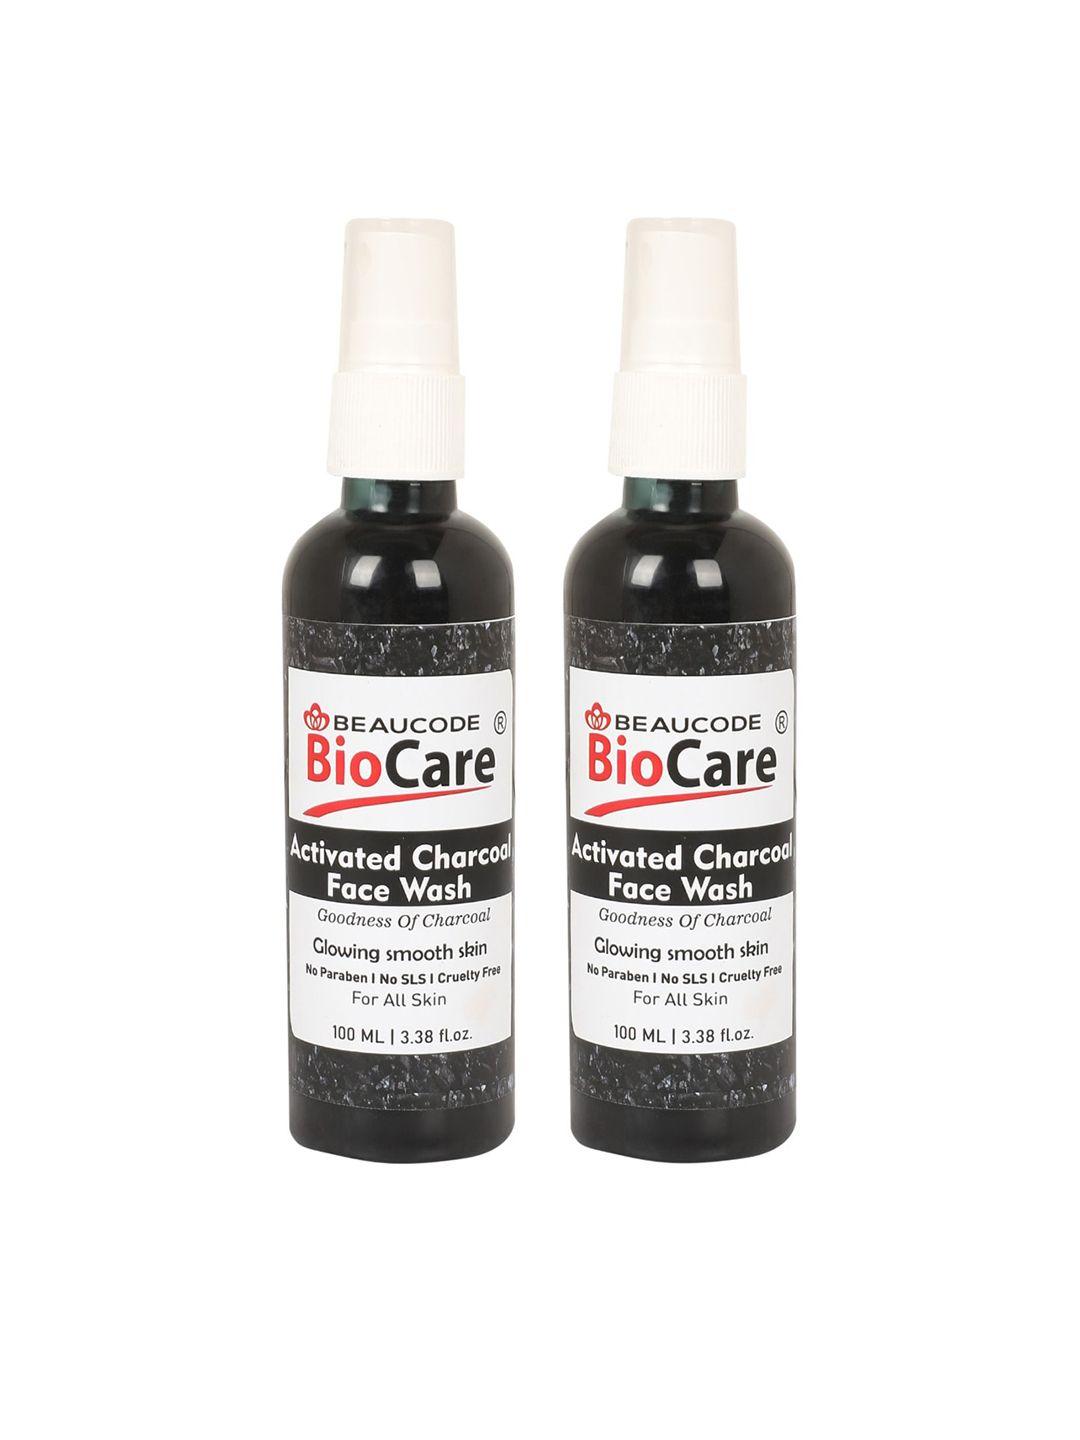 beaucode-biocare-set-of-2-activated-charcoal-face-wash---100ml-each